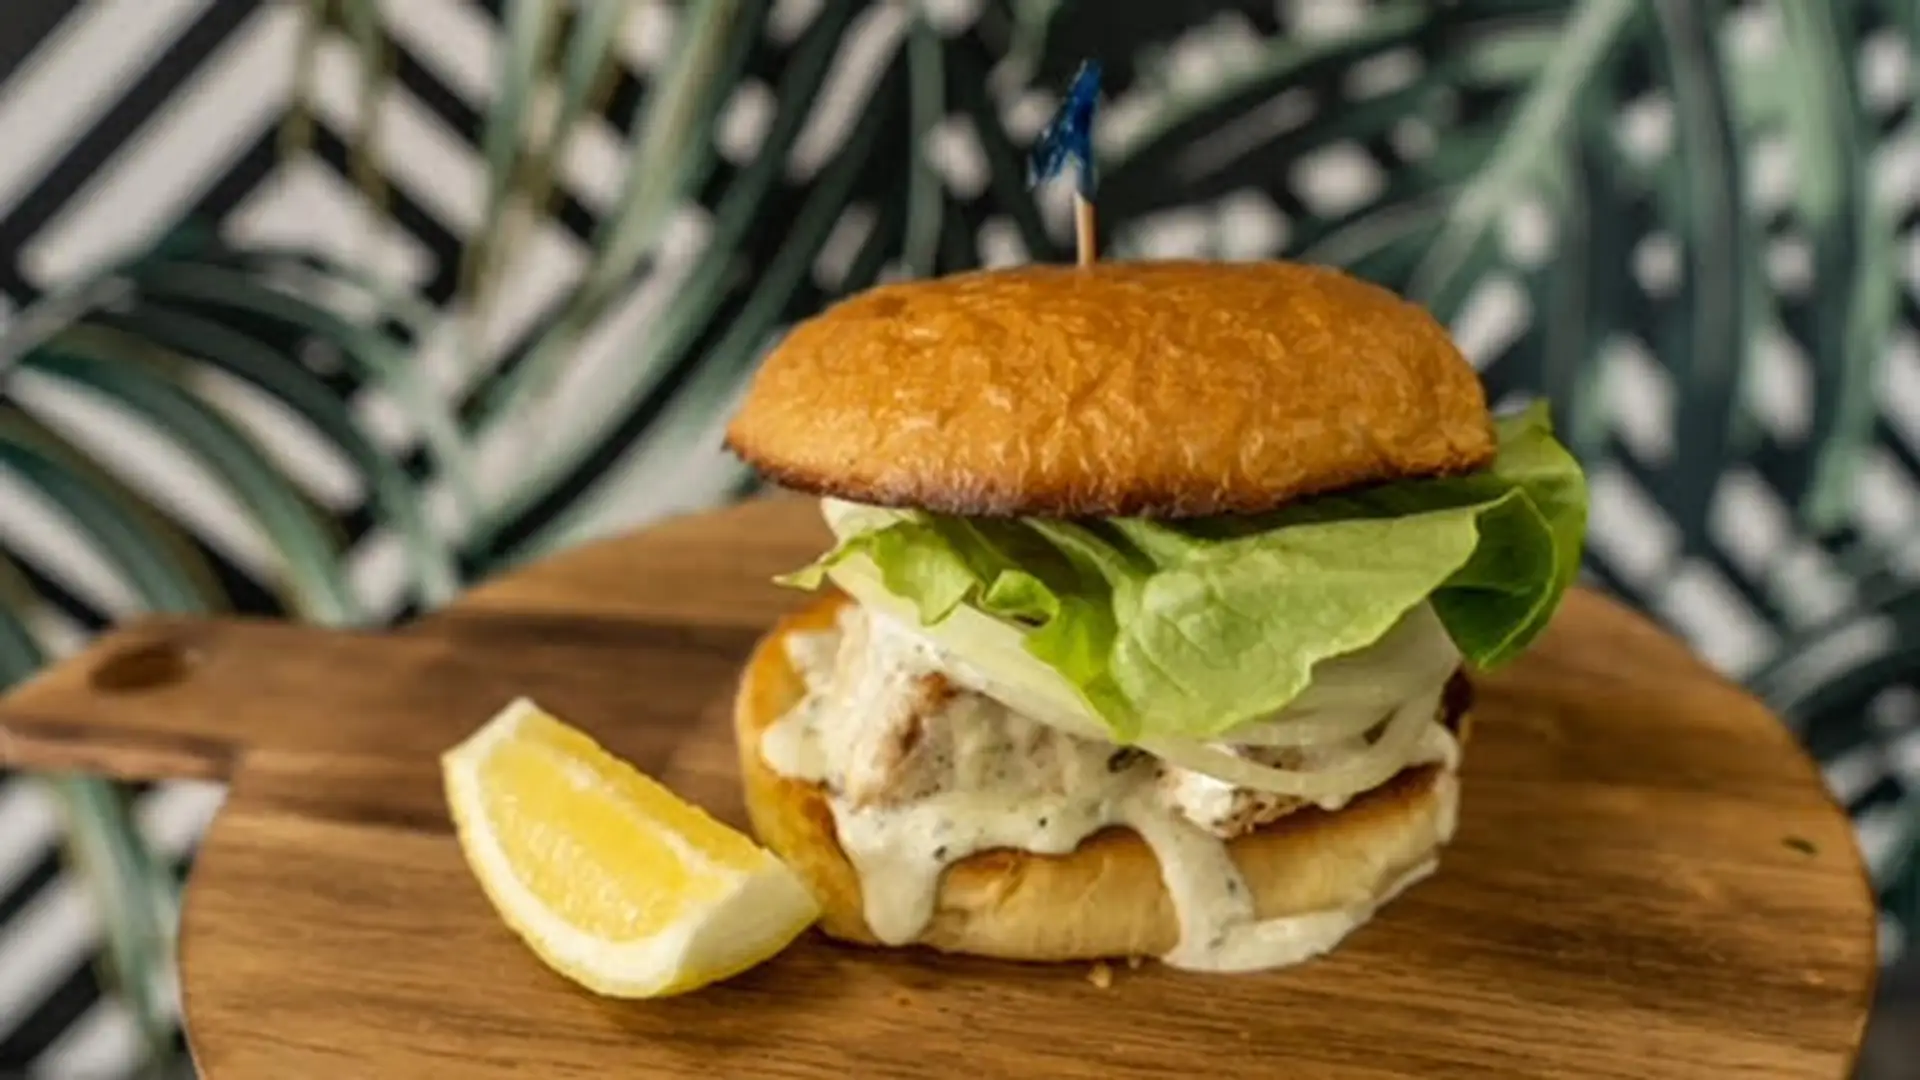 A fish sandwich with a golden-brown bun, lettuce, creamy white sauce, and a thick fish fillet, secured with a toothpick on a wooden board with a lemon wedge. The background features a patterned leafy design. This culinary delight could easily compete for the best burger on the big island.